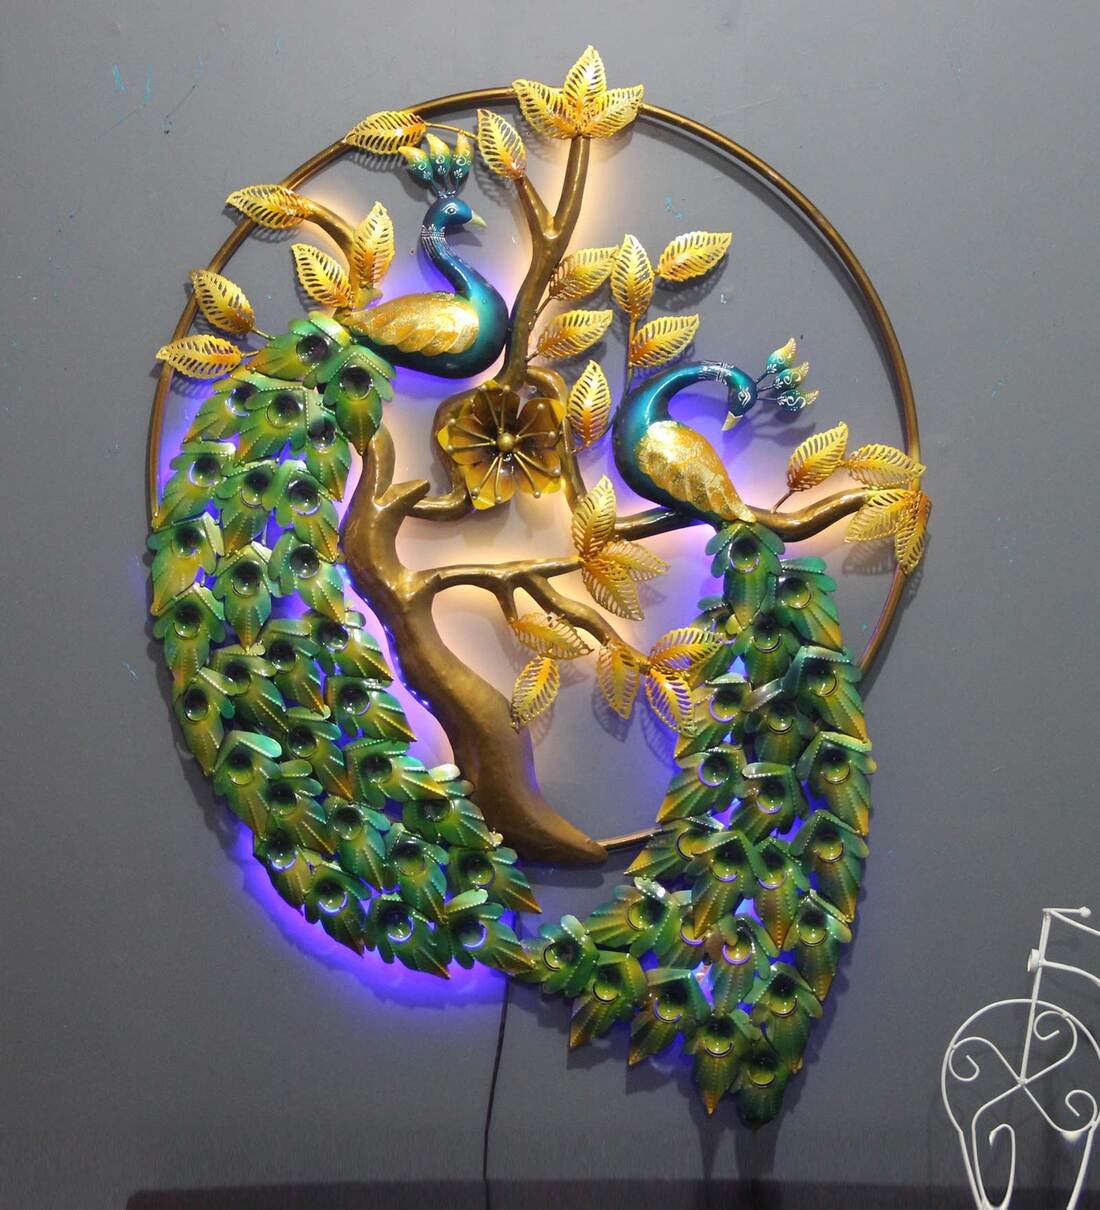 Metal Ring Lovebird Peacock Led Wall Panel By Decorfry